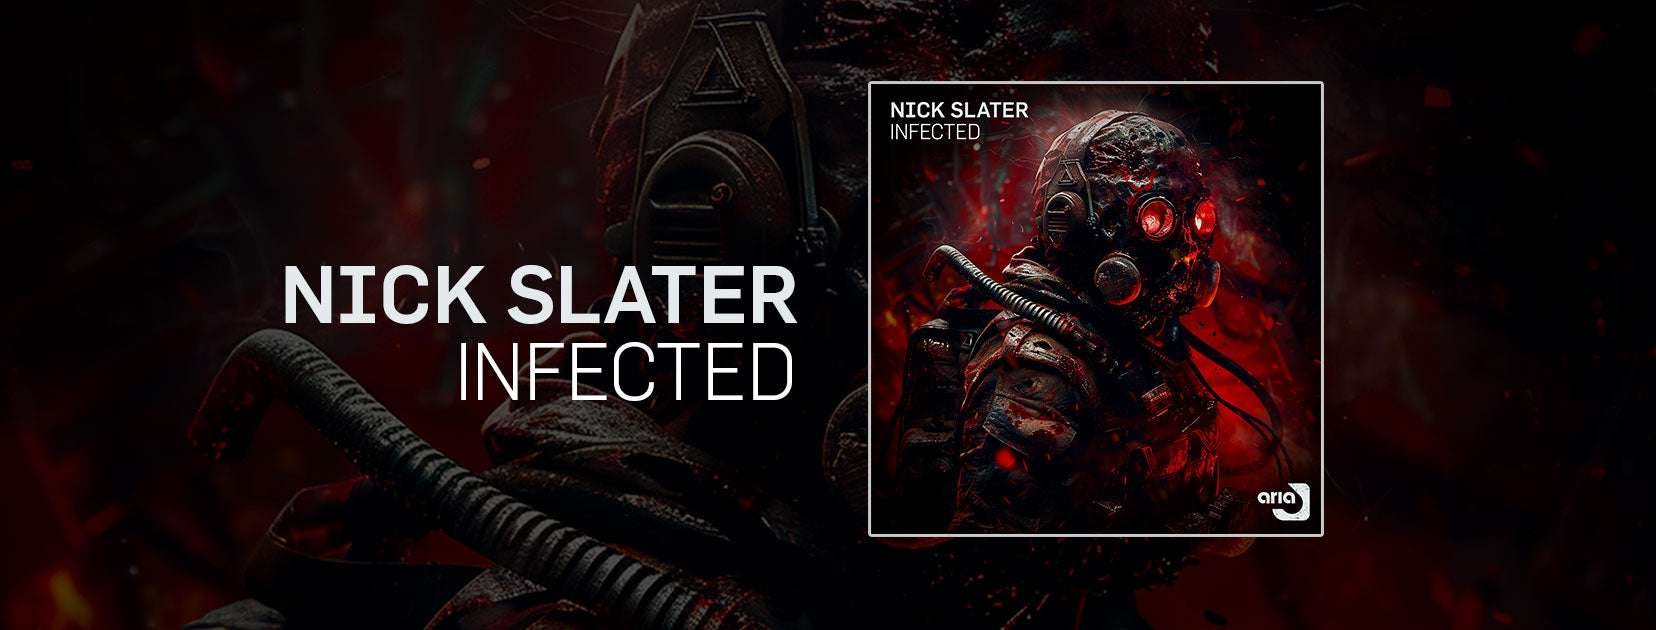 Nick Slater - Infected